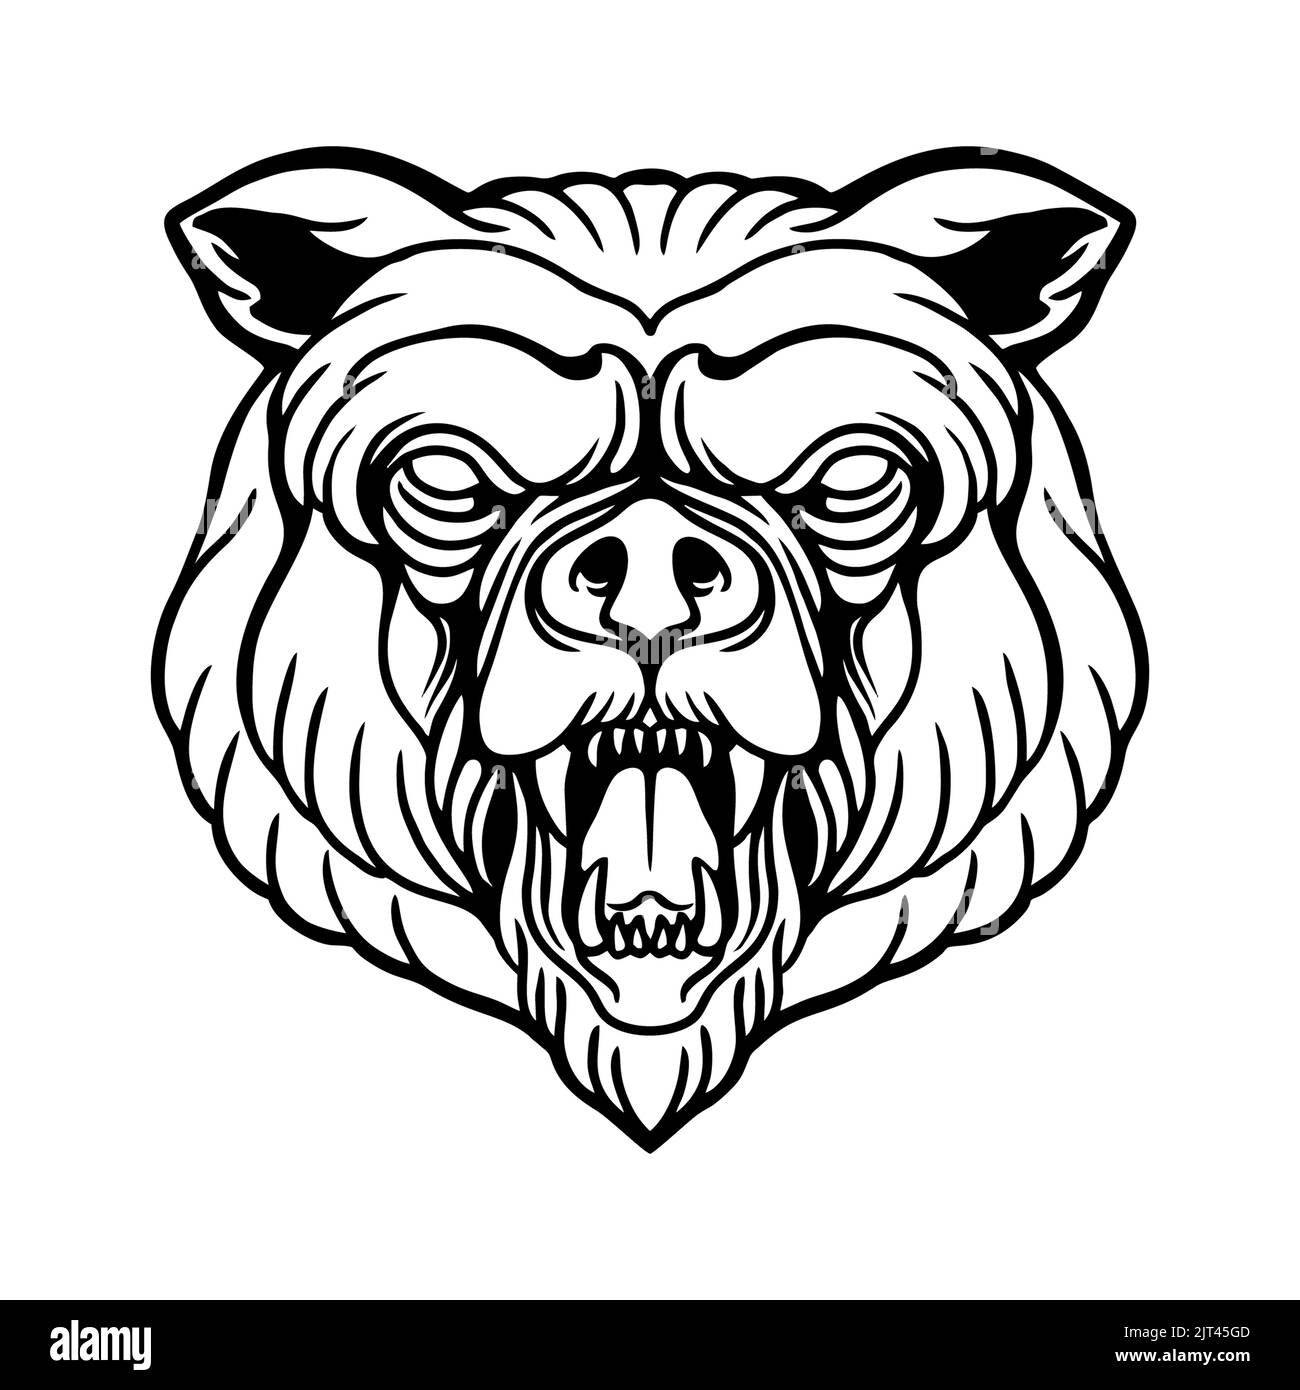 Bear Head Outline Clipart Silhouette Vector illustrations for your work Logo, mascot merchandise t-shirt, stickers and Label designs, poster, greeting Stock Photo